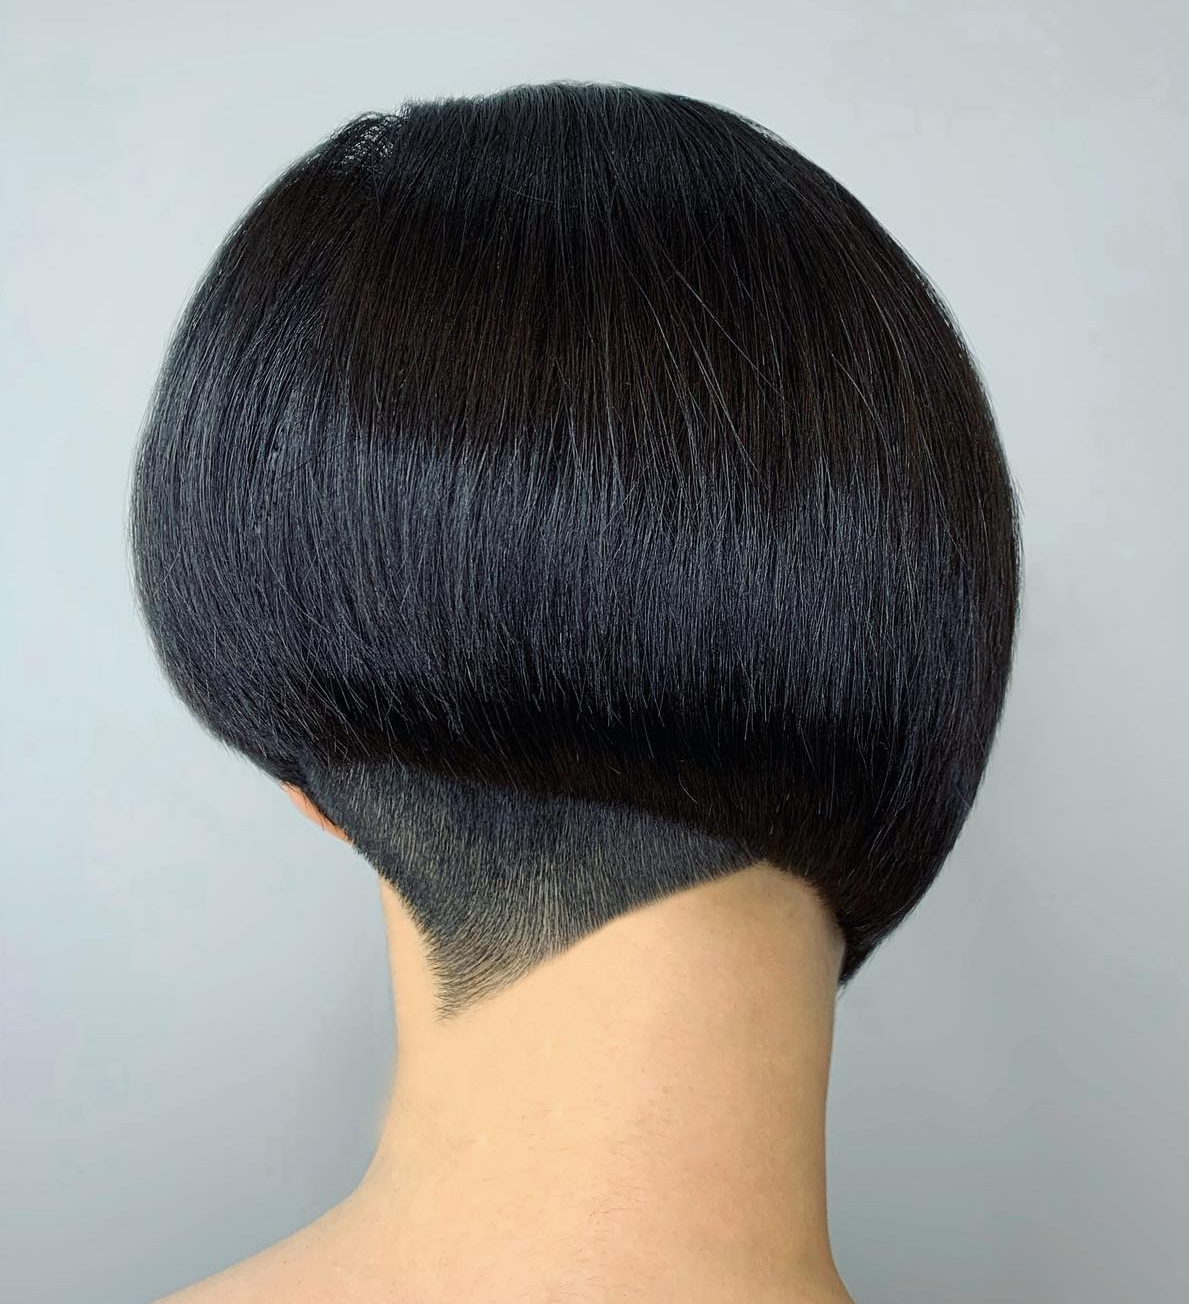 Shaved Black Undercut Hairstyle